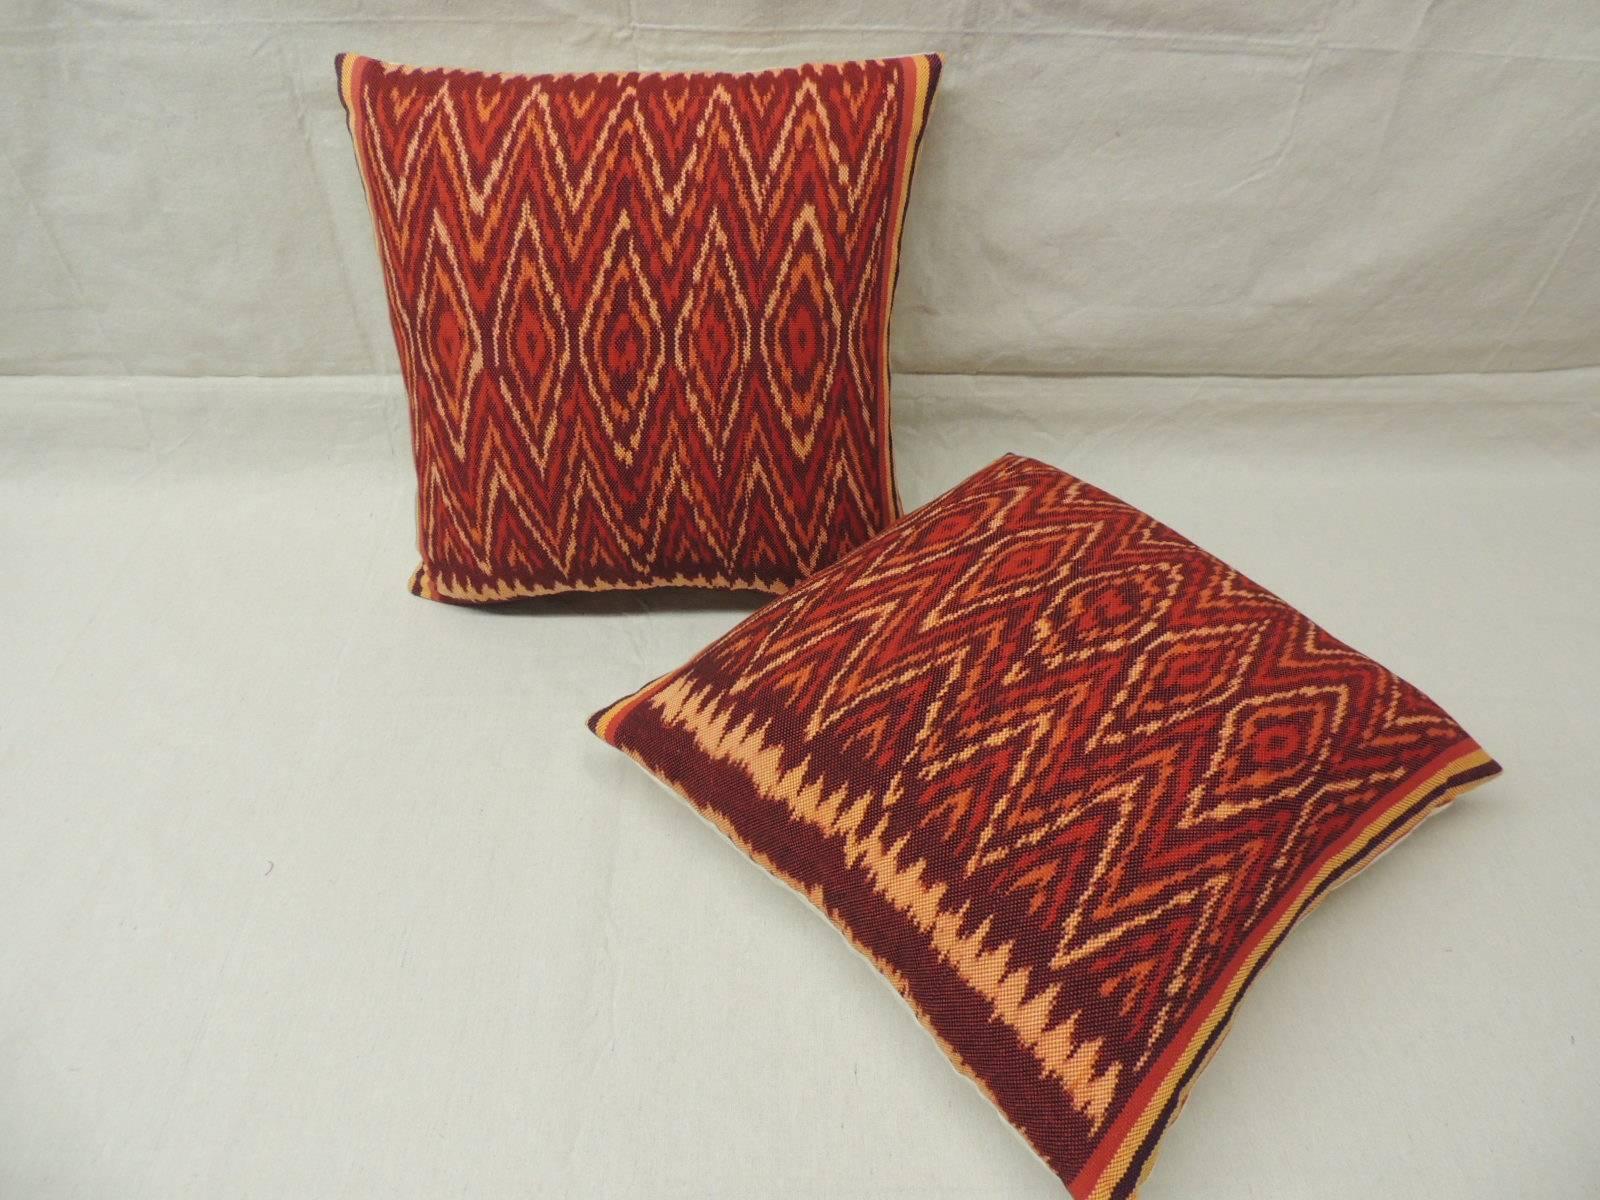 Pair of vintage Ikat pillows. Woven (not printed.) tribal pattern in shades of yellow, red, brown, orange and with natural linen backing (flame stitch.)

   